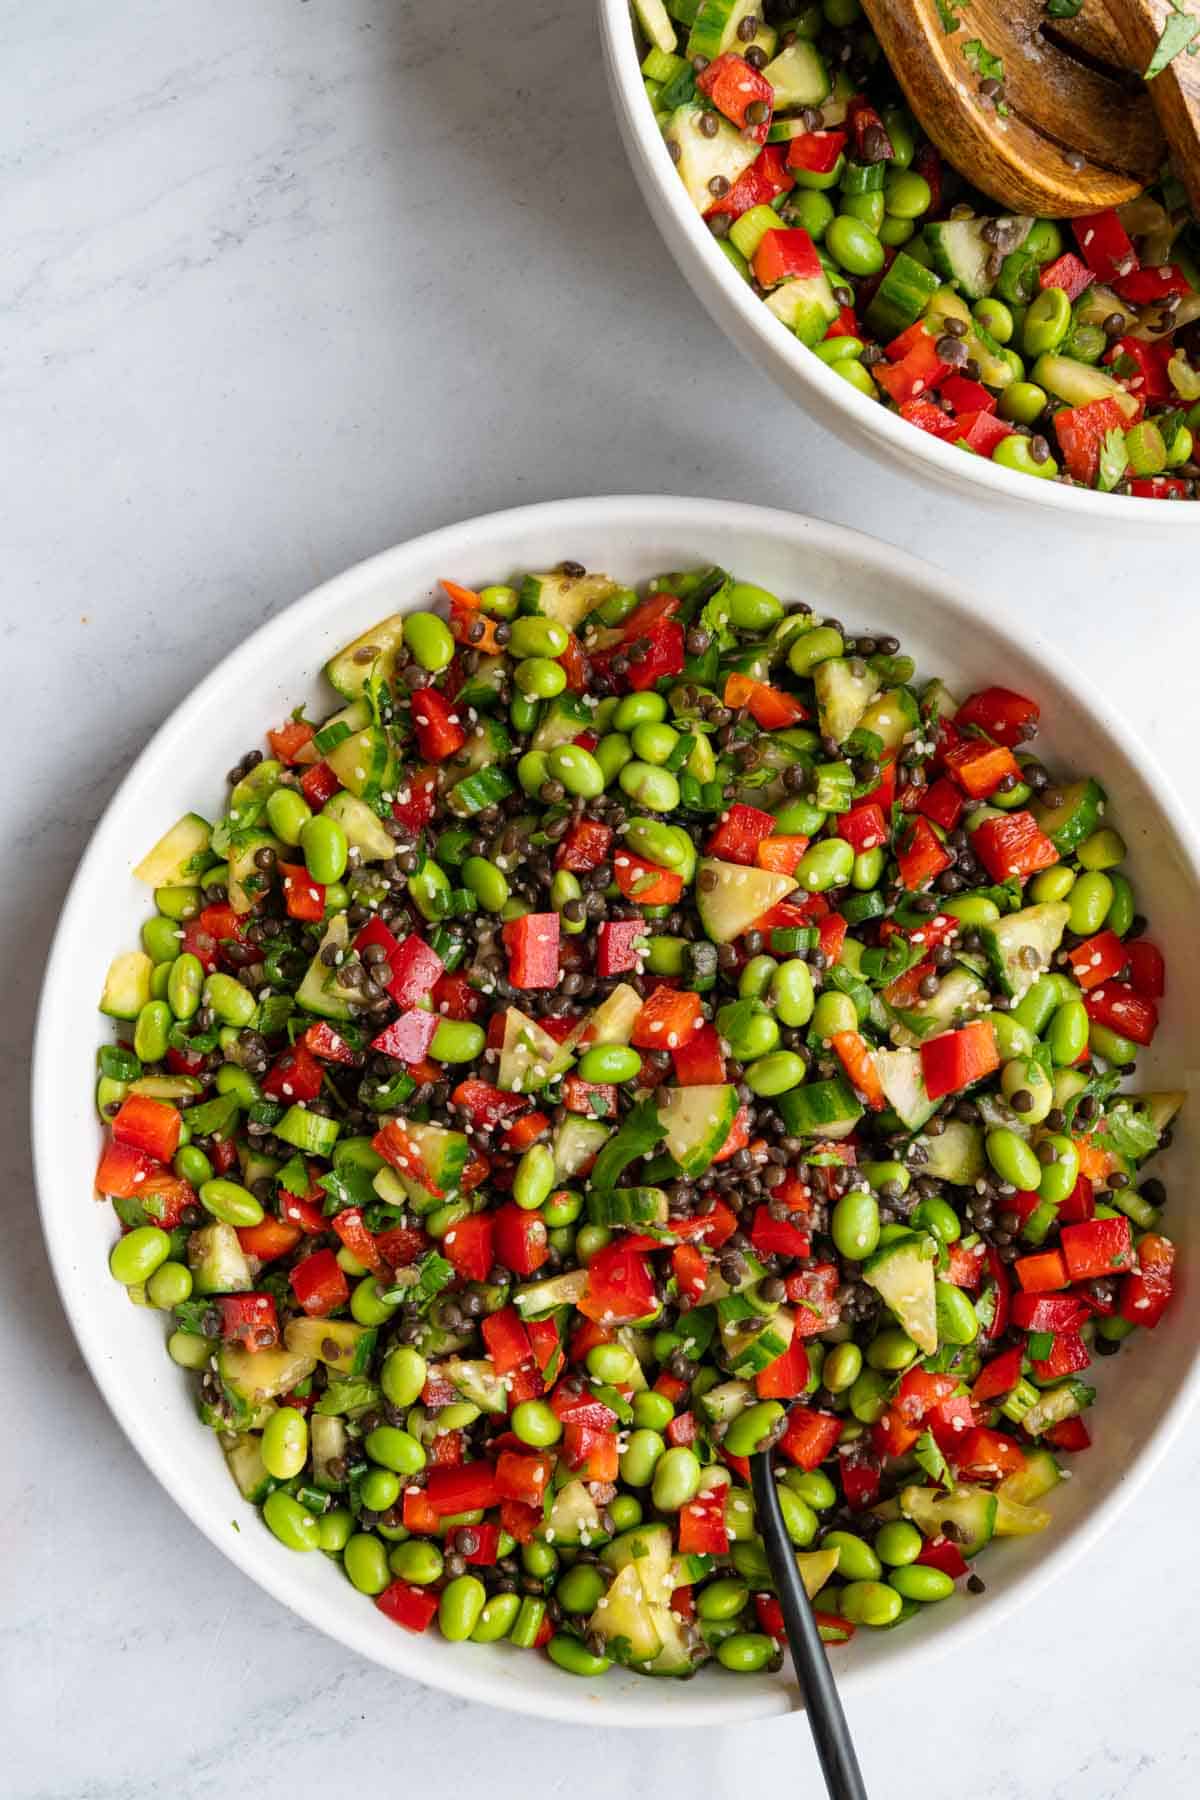 Edamame, black lentils, chopped cucmber and red bell pepper, sesame seeds, and chopped green onion and cilantro, in a white bowl with a black fork, next to another bowl with more edamame salad and wooden servers.